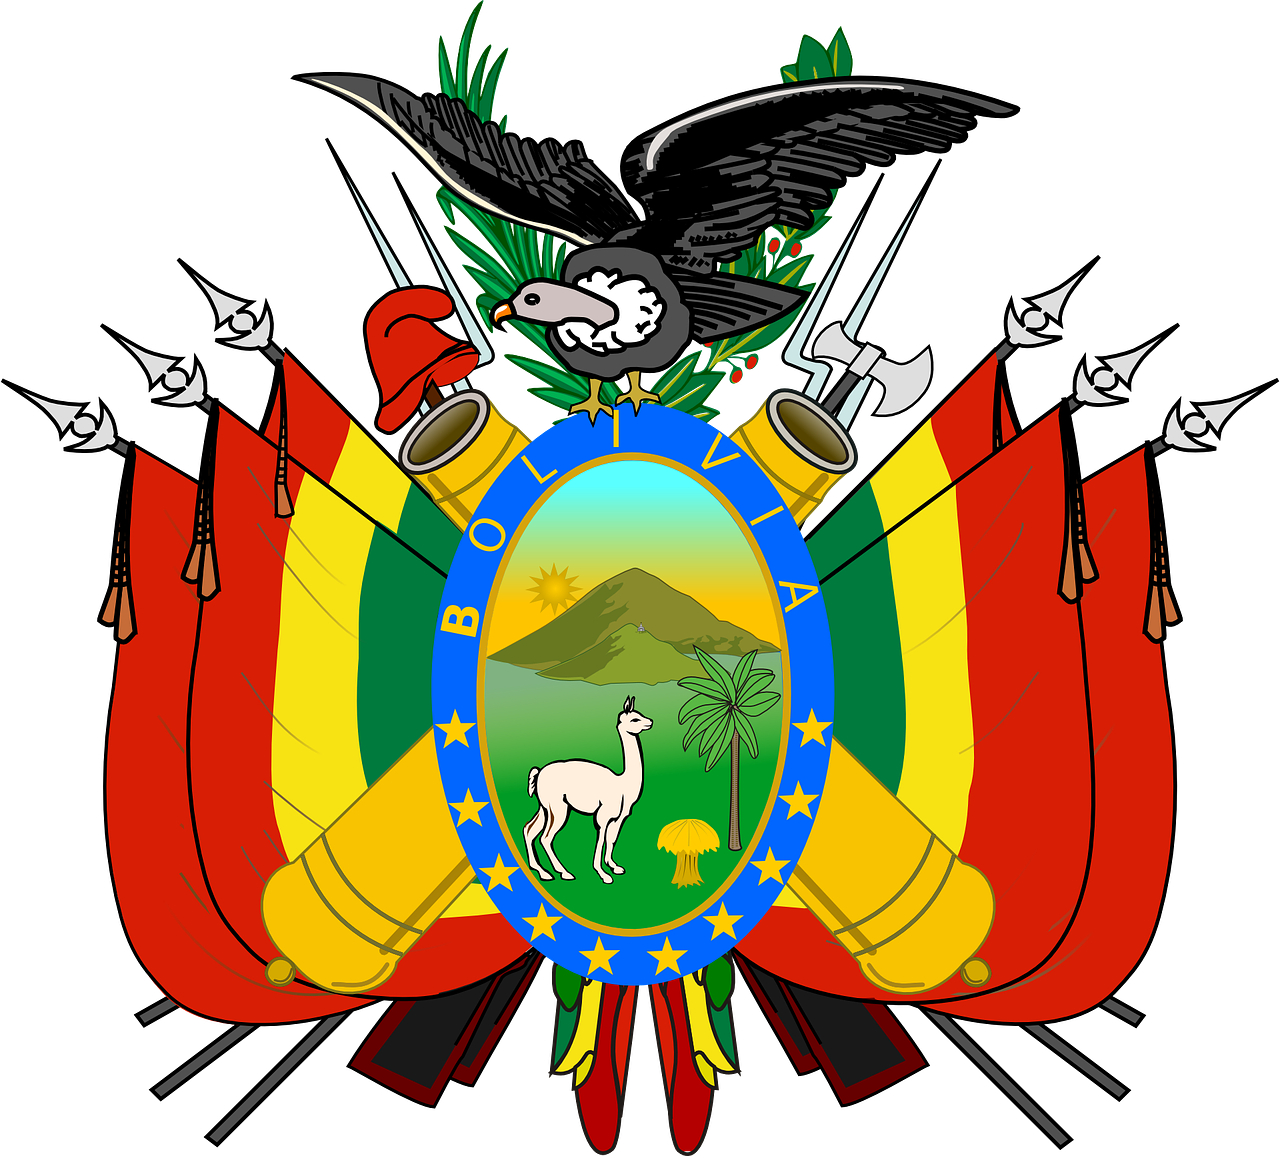 A Colorful Emblem With A Llama And Weapons